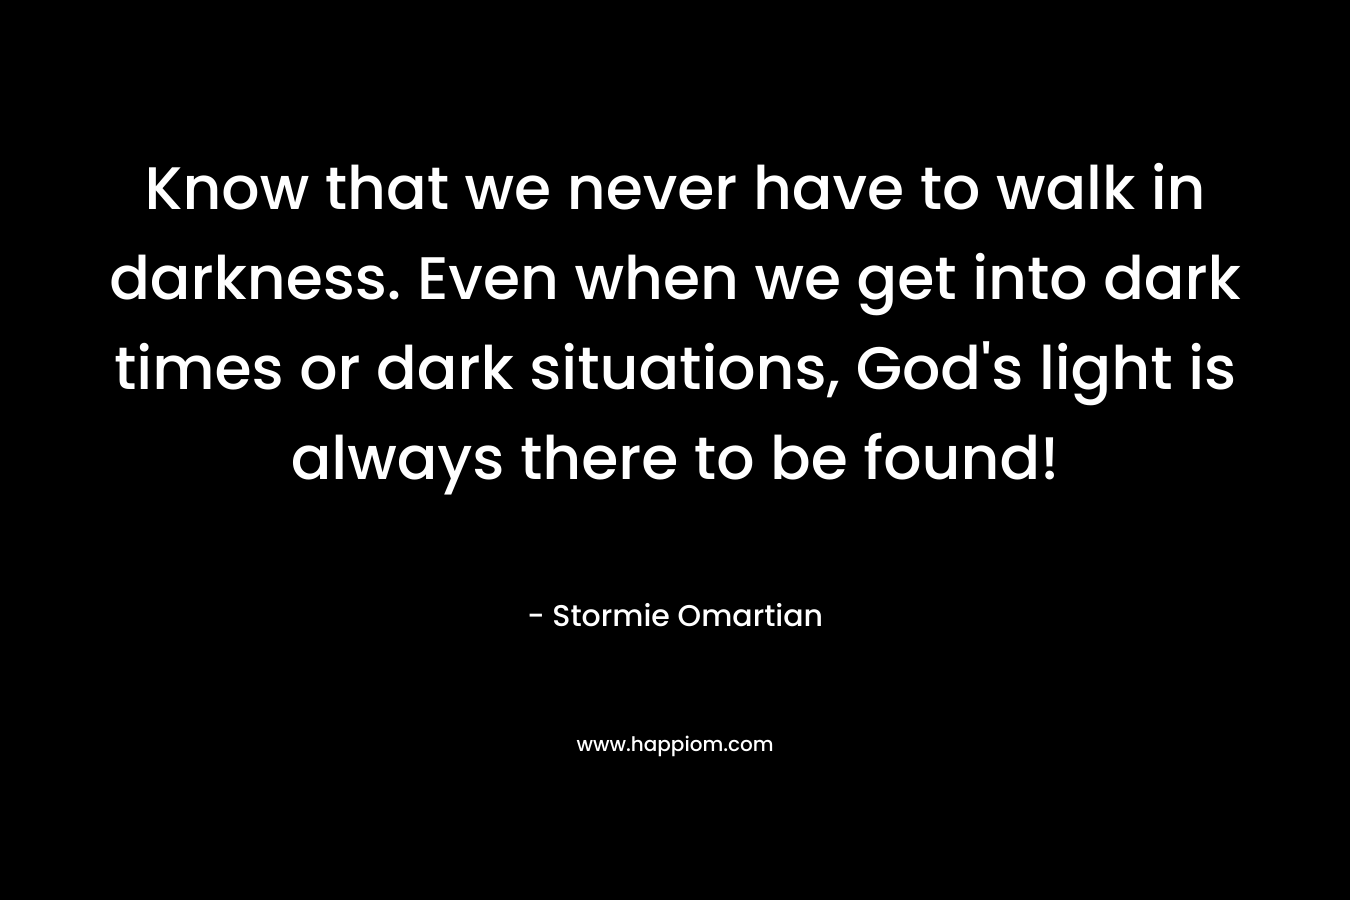 Know that we never have to walk in darkness. Even when we get into dark times or dark situations, God’s light is always there to be found! – Stormie Omartian